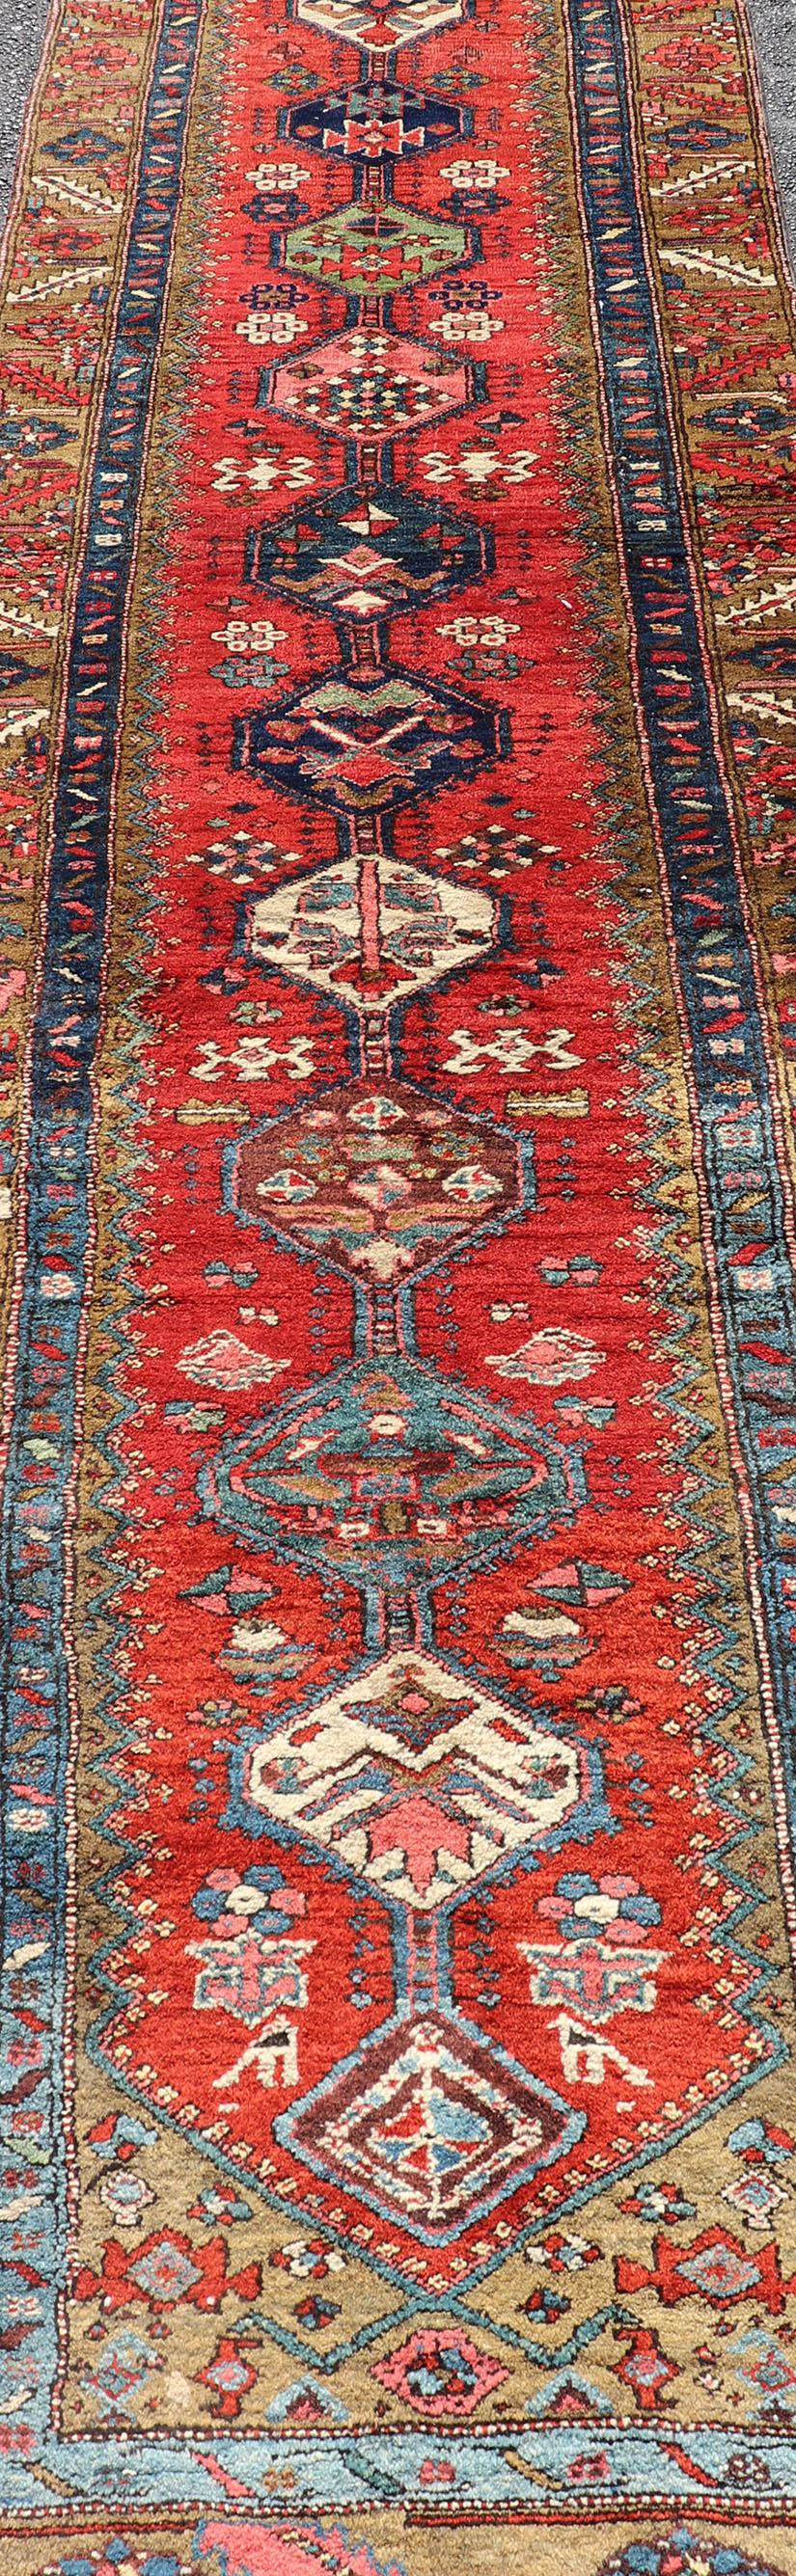 Wool Antique Persian Heriz Runner in Reds, Blues, Pink, Ivory and Earthy Tones For Sale